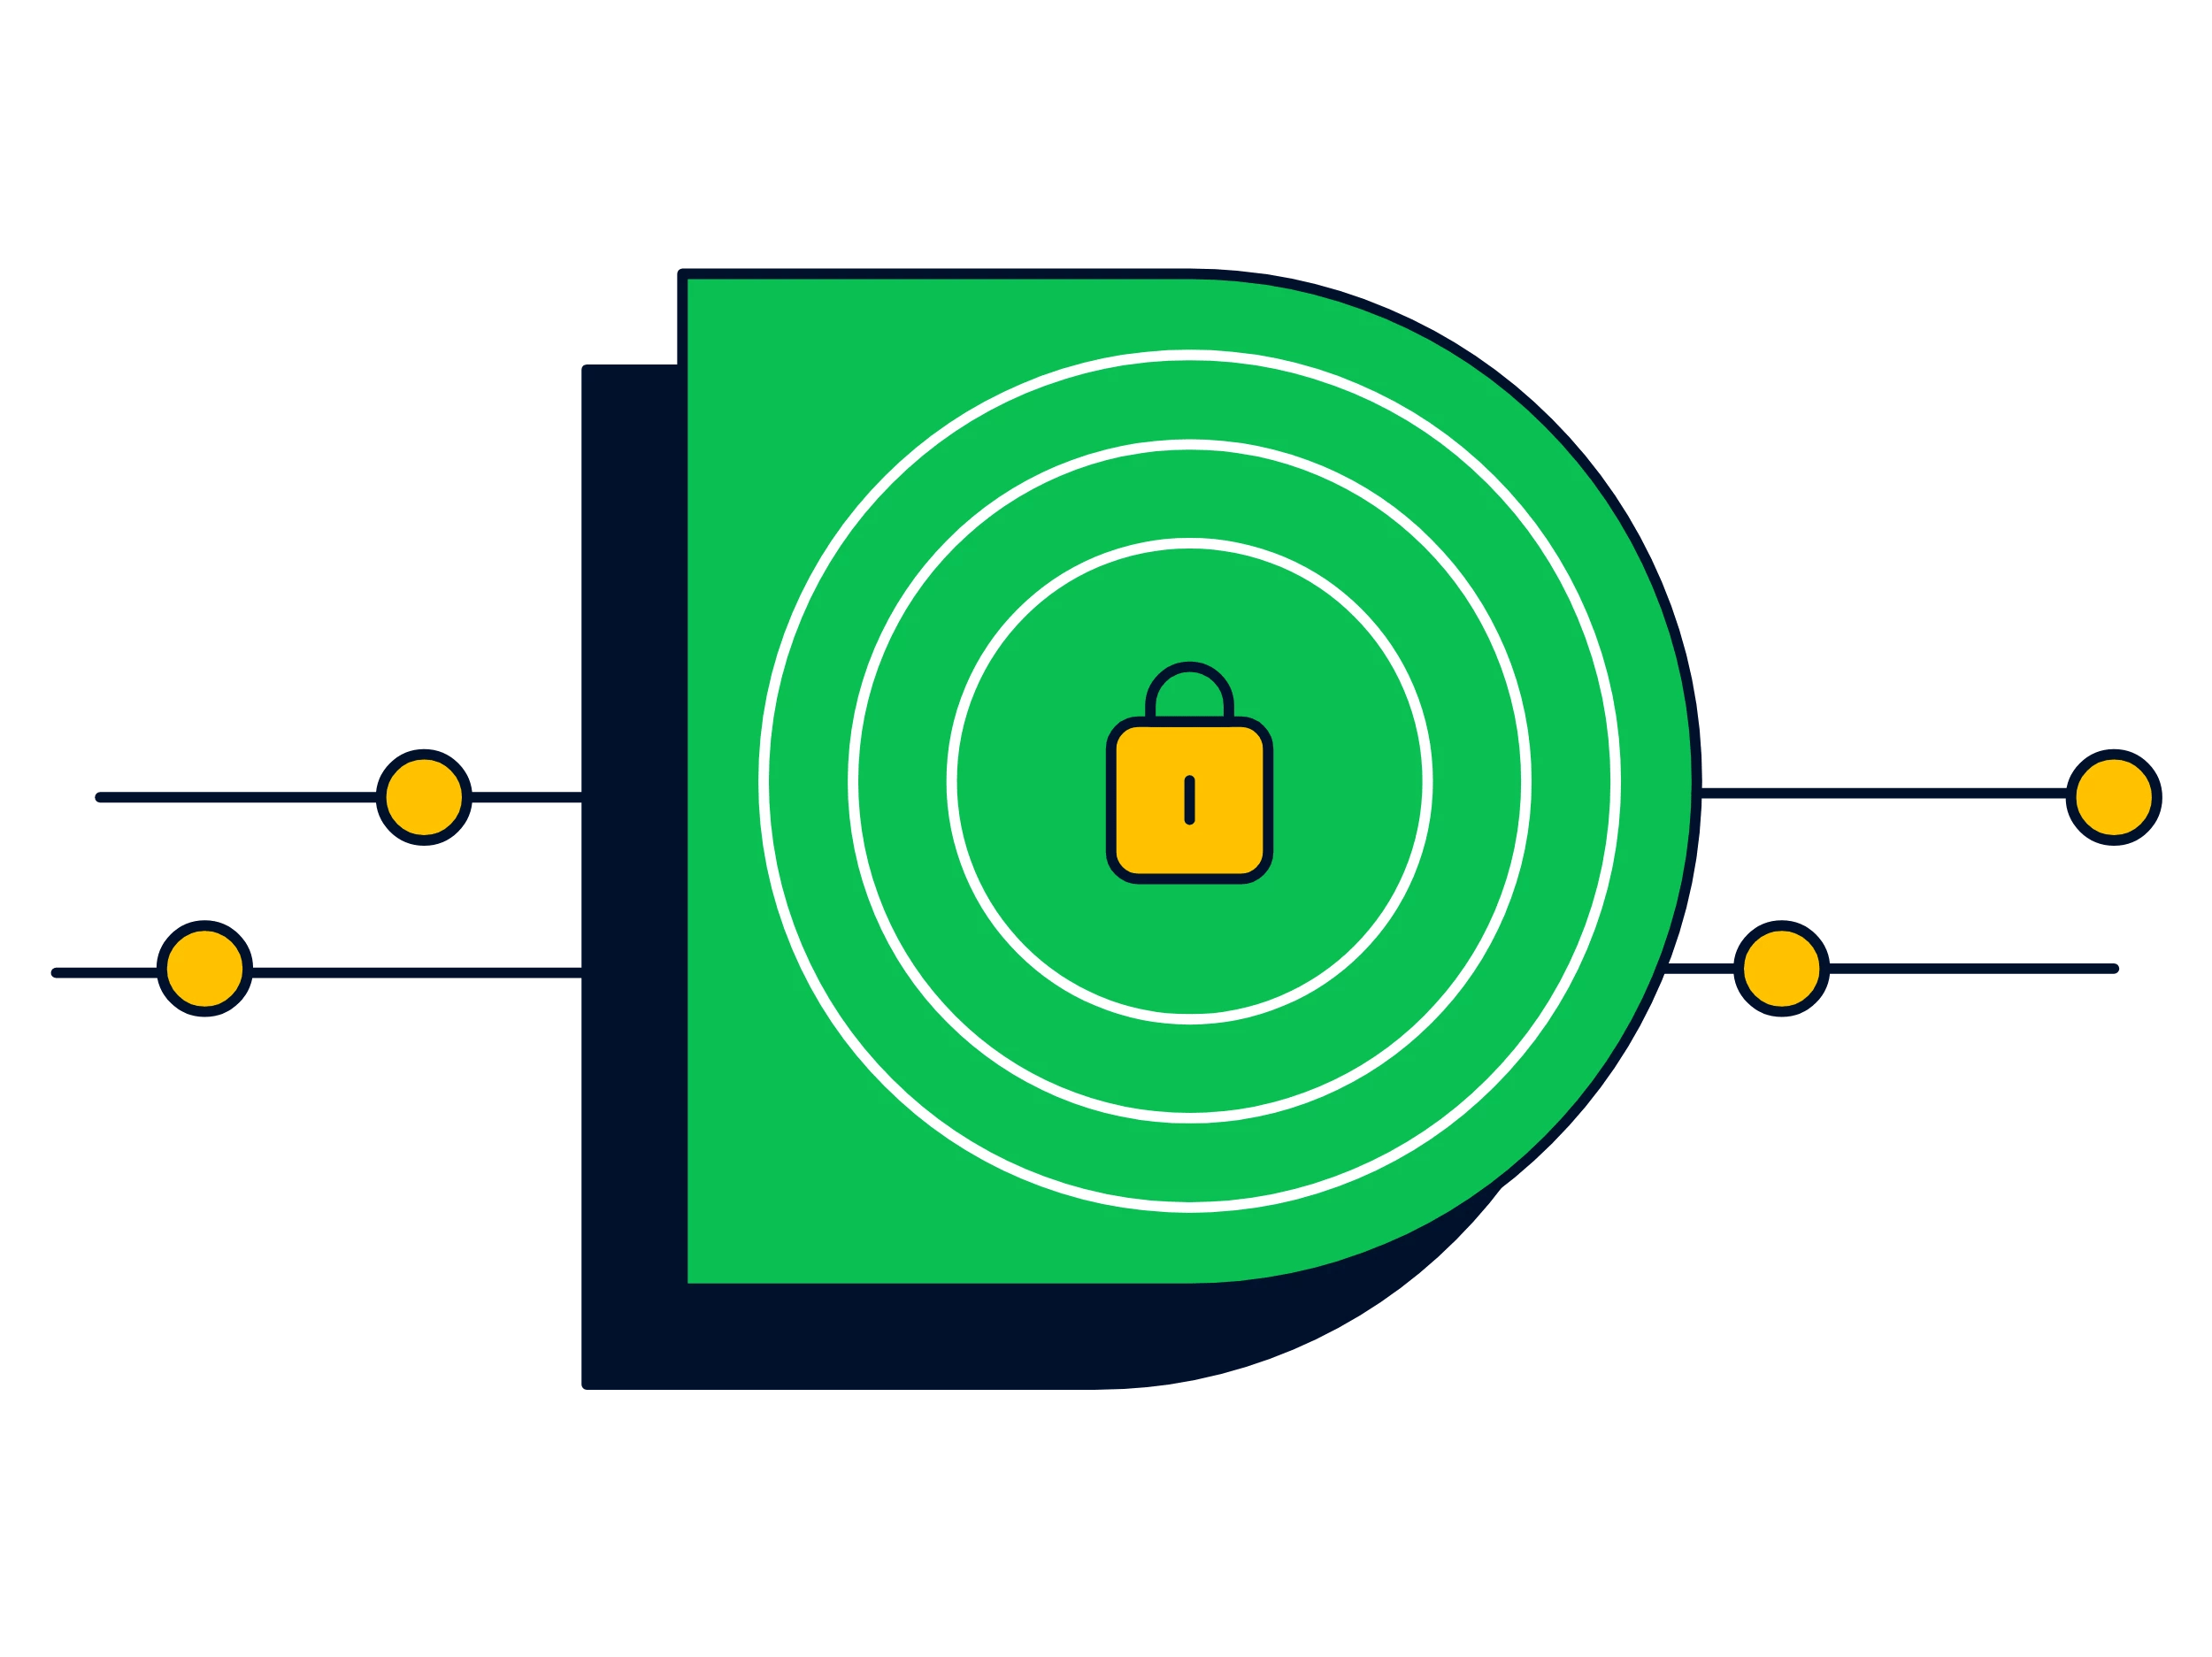 A yellow lock on top of a fully colored green D-shaped illustration.